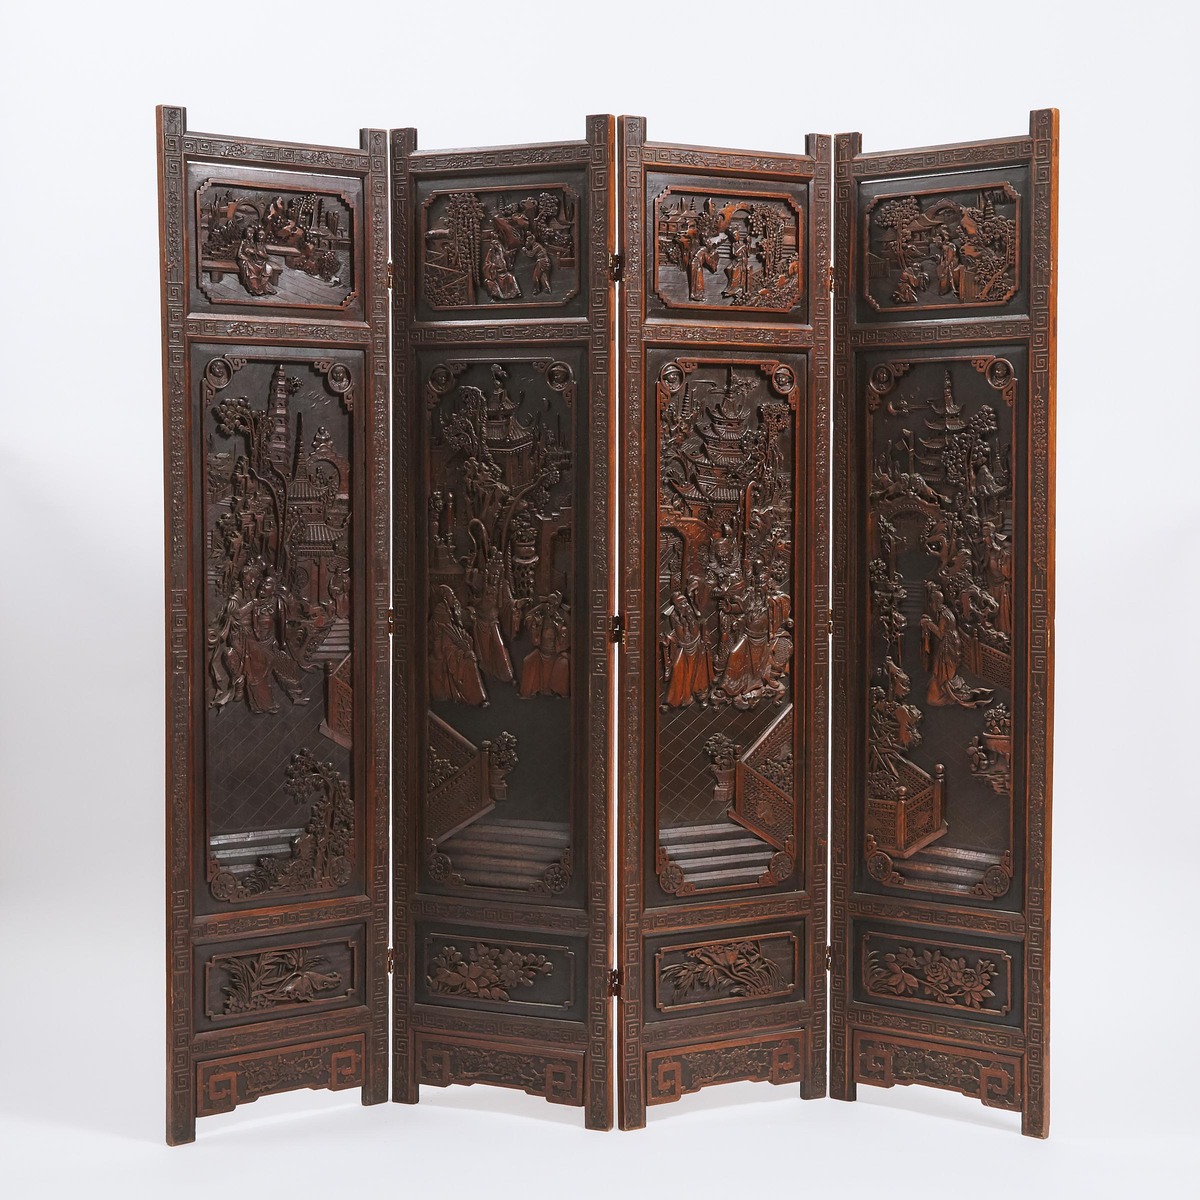 A Chinese Carved Wood 'Three Kingdoms' Four-Panel Floor Screen, Mid 20th Century, 民国 木雕人物故事纹屏风四扇, he